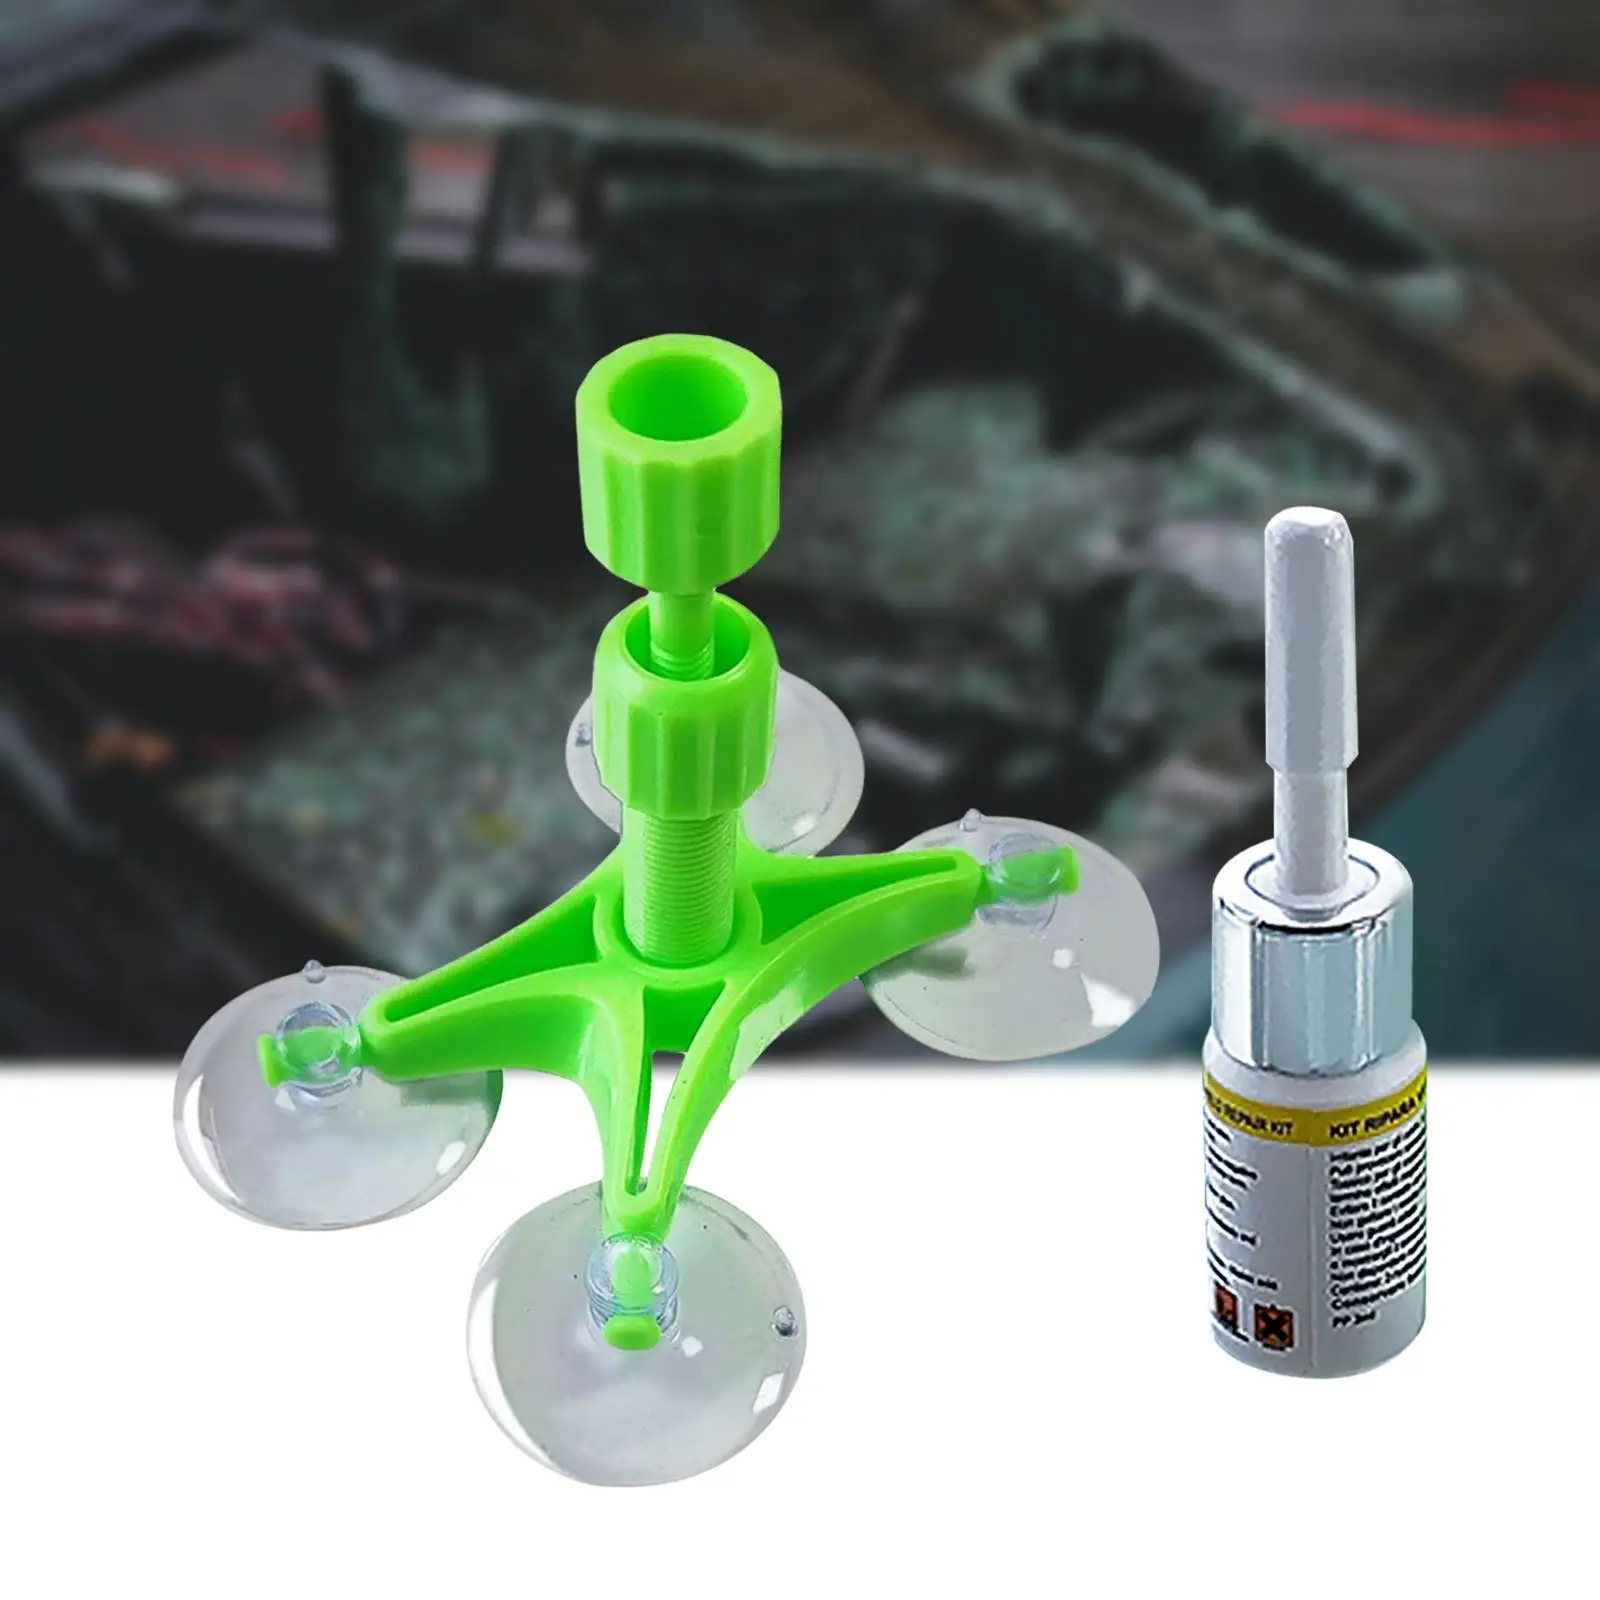 Car Auto Glass Windshield Fluid Repair Set for Chips and Cracks Widely Use